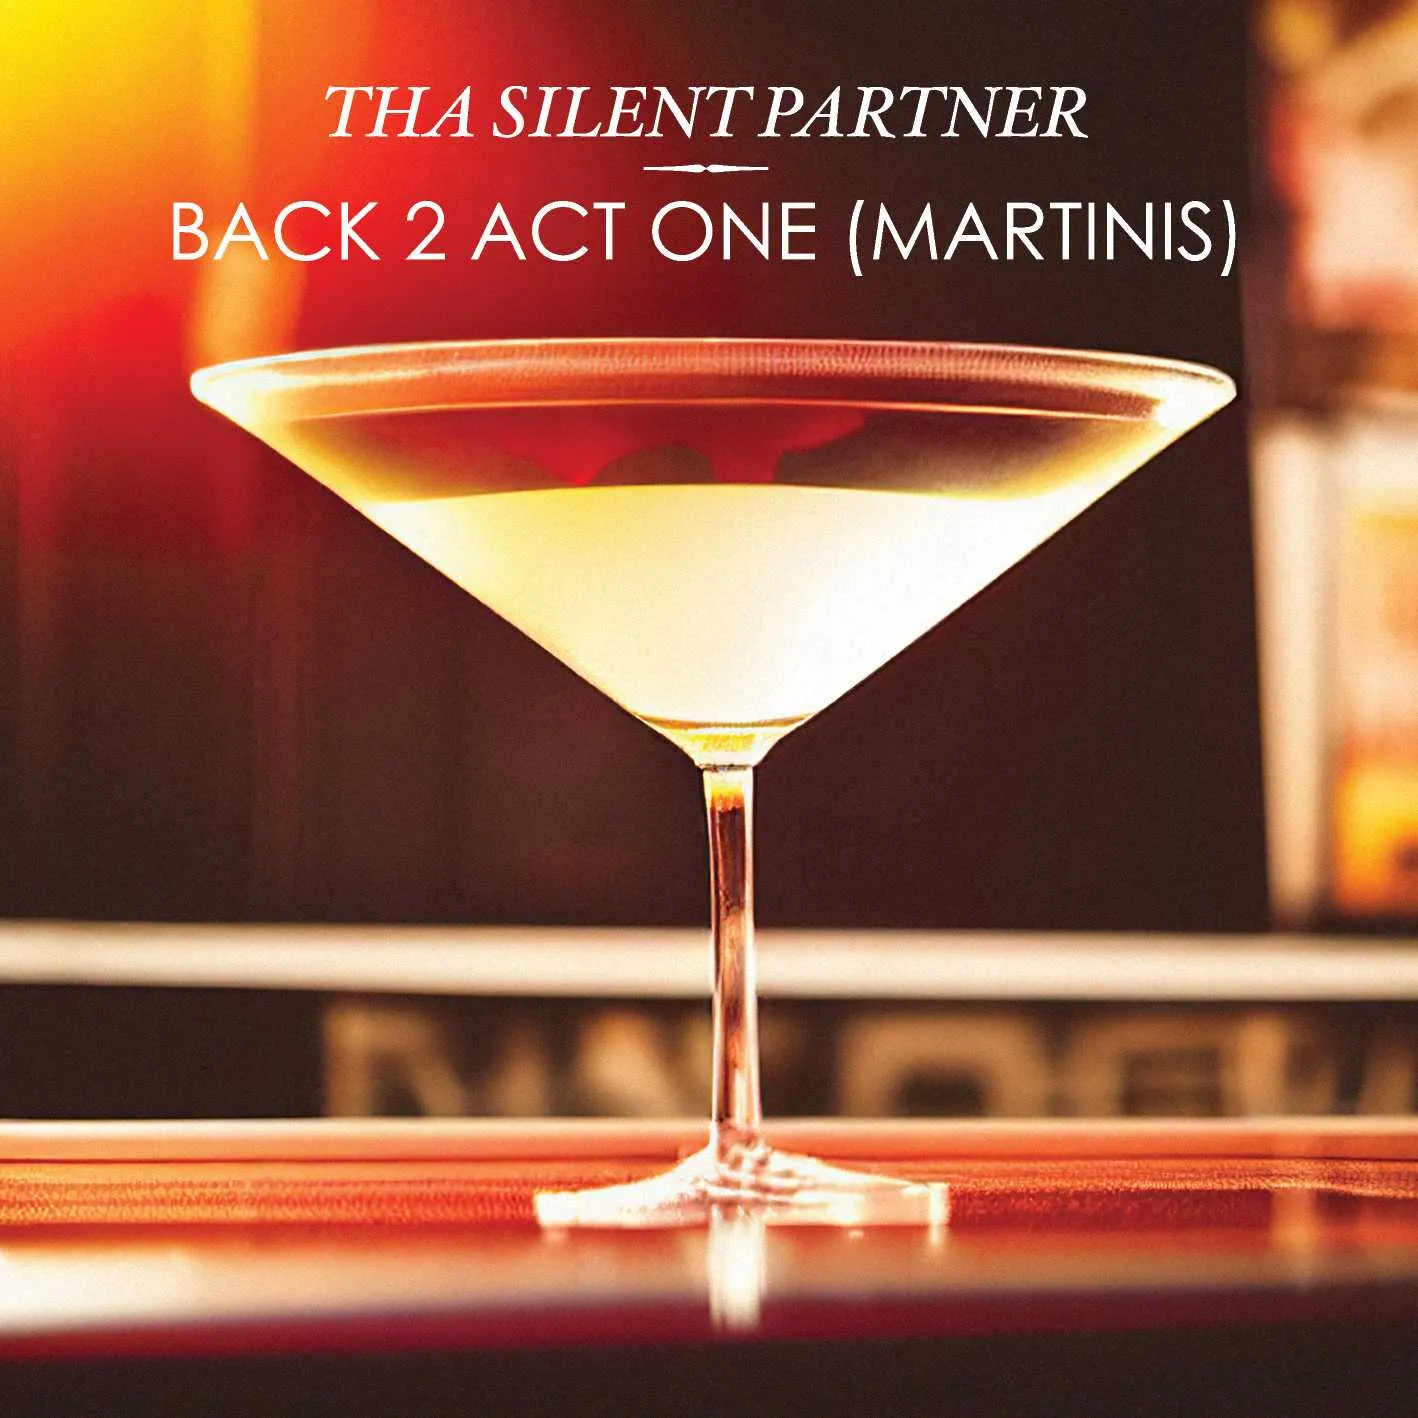 Album cover for “Back 2 Act One (MARTINIS)” by Tha Silent Partner